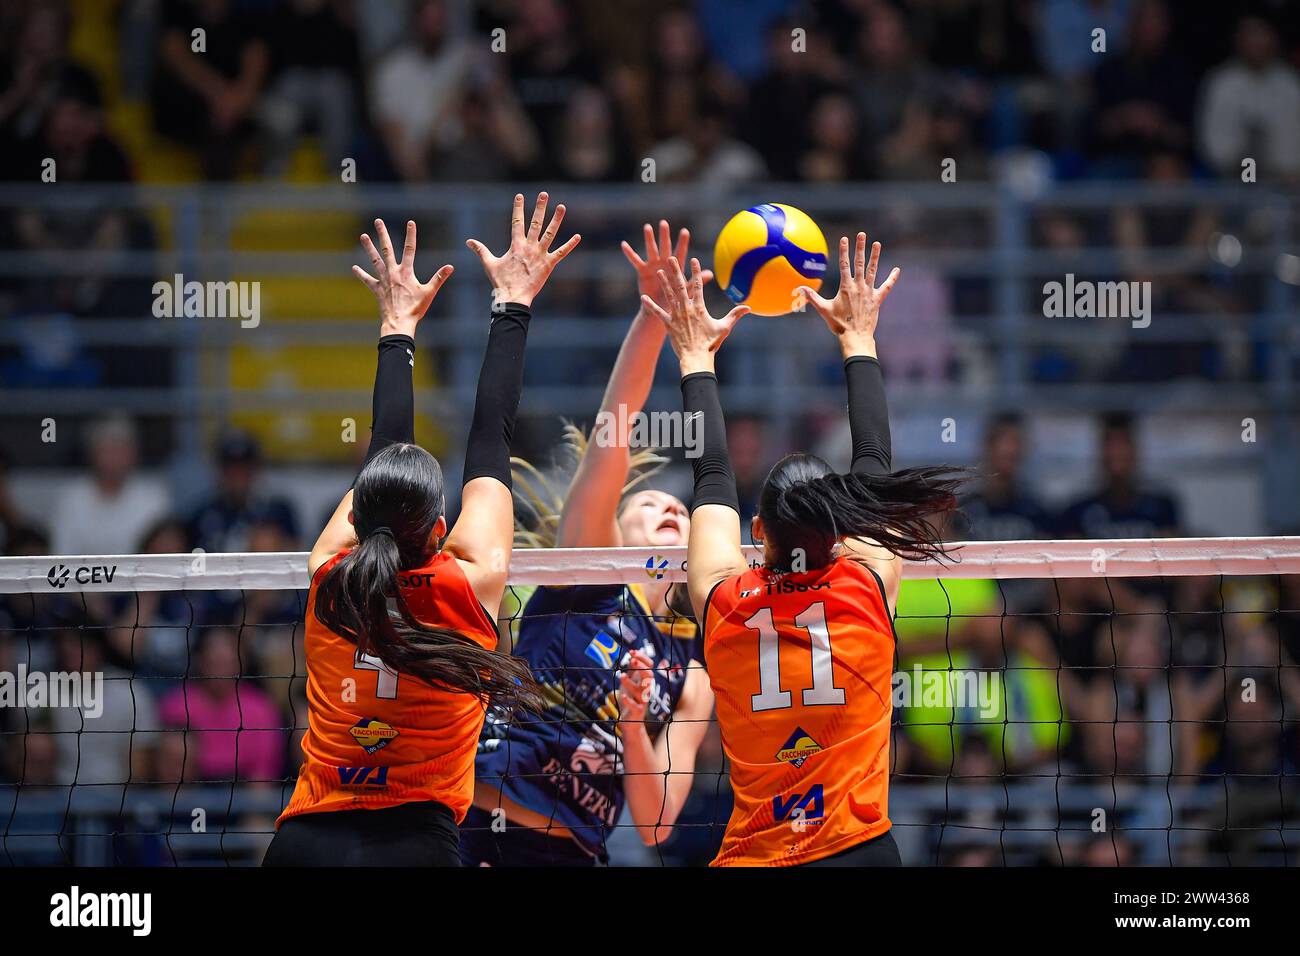 Turin, Italy. 10th Jan, 2024. Final CEV Volleyball Cup 2024 Women Reale Mutua Fenera Chieri '76 (ITA) - Viteos Neuchatel UC (SUI) 3-1 Pala Gianni Asti Turin Haymes Madeline 4 (Viteos Neuchatel) Gross Jasmine Julianne 11 (Viteos Neuchatel) defend during Final CEV Champions League match between Reale Mutua Fener Chieri '76 and Viteos Neuchatel UC Pala Gianni Asti in Turin, Italy 20 March 2024 (Photo by Tonello Abozzi/Pacific Press) Credit: Pacific Press Media Production Corp./Alamy Live News Stock Photo